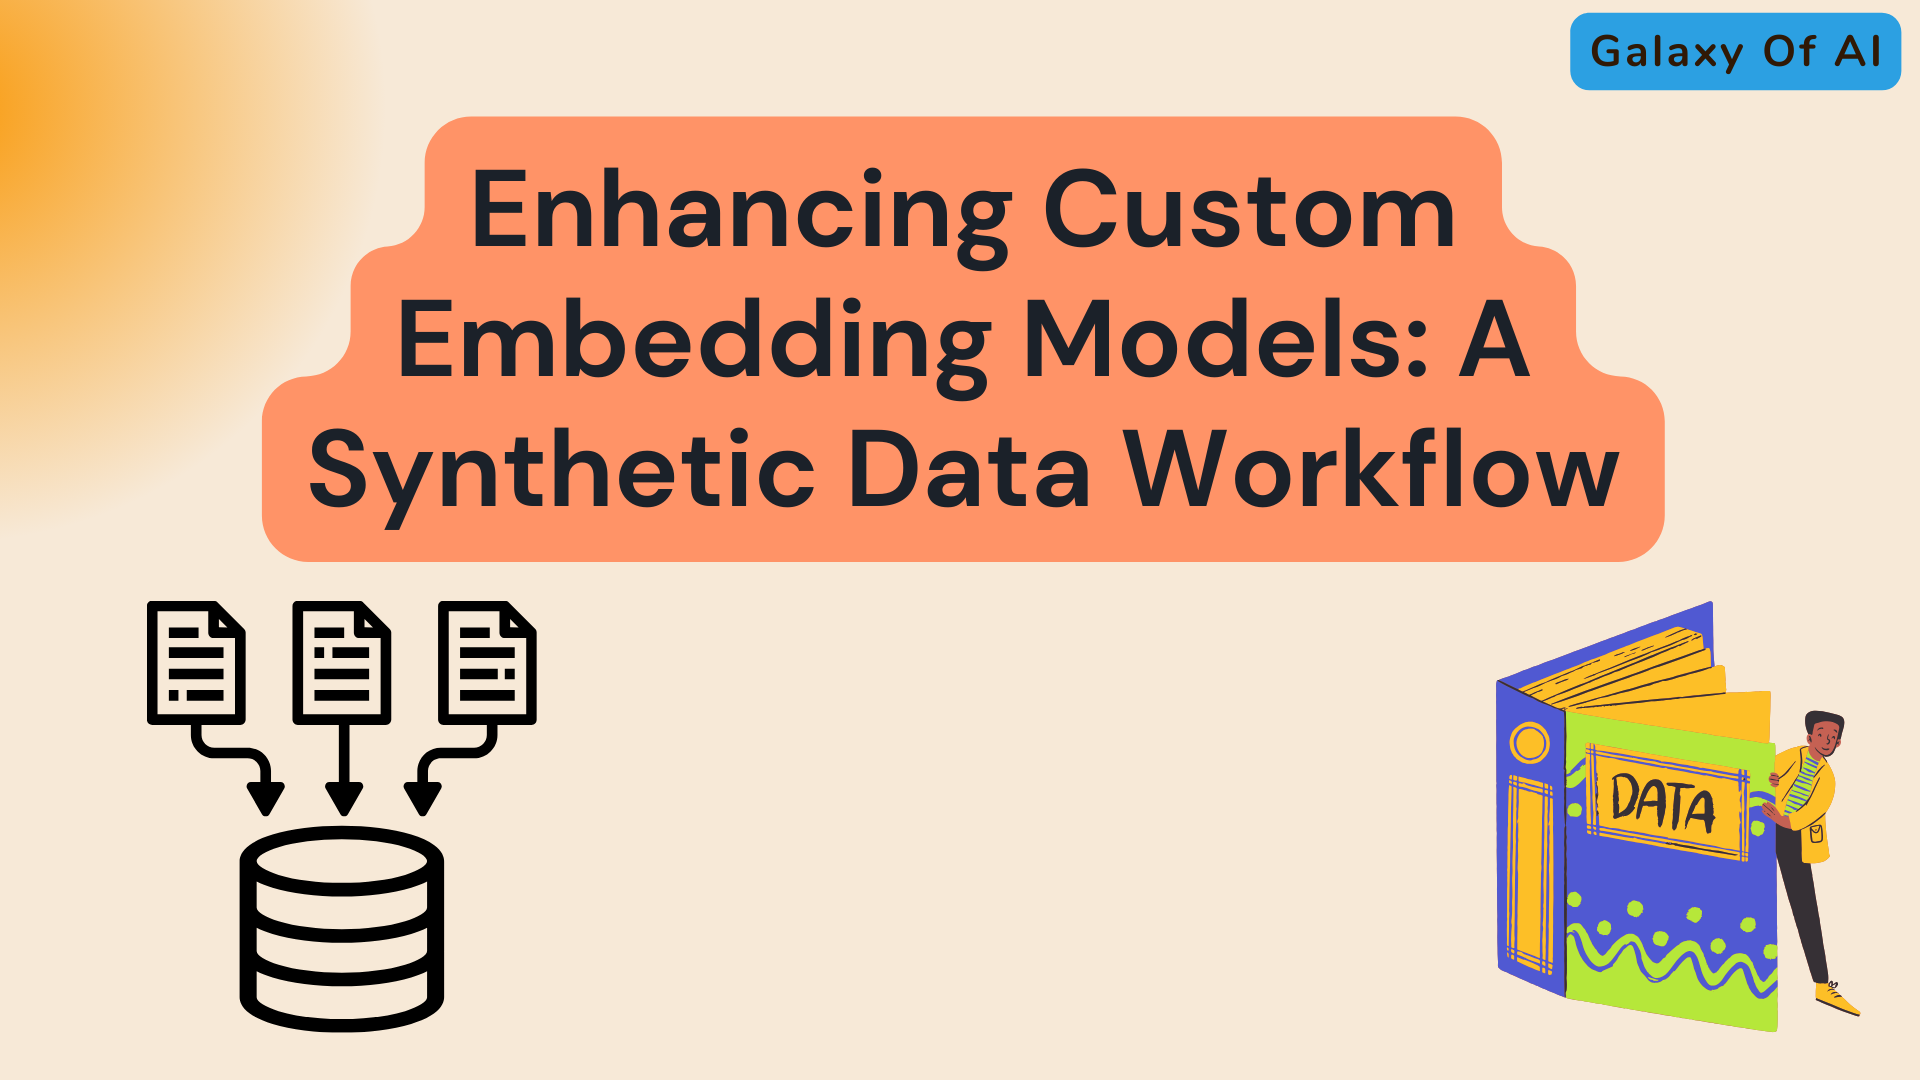 Enhancing Custom Embedding Models: A Synthetic Data Workflow